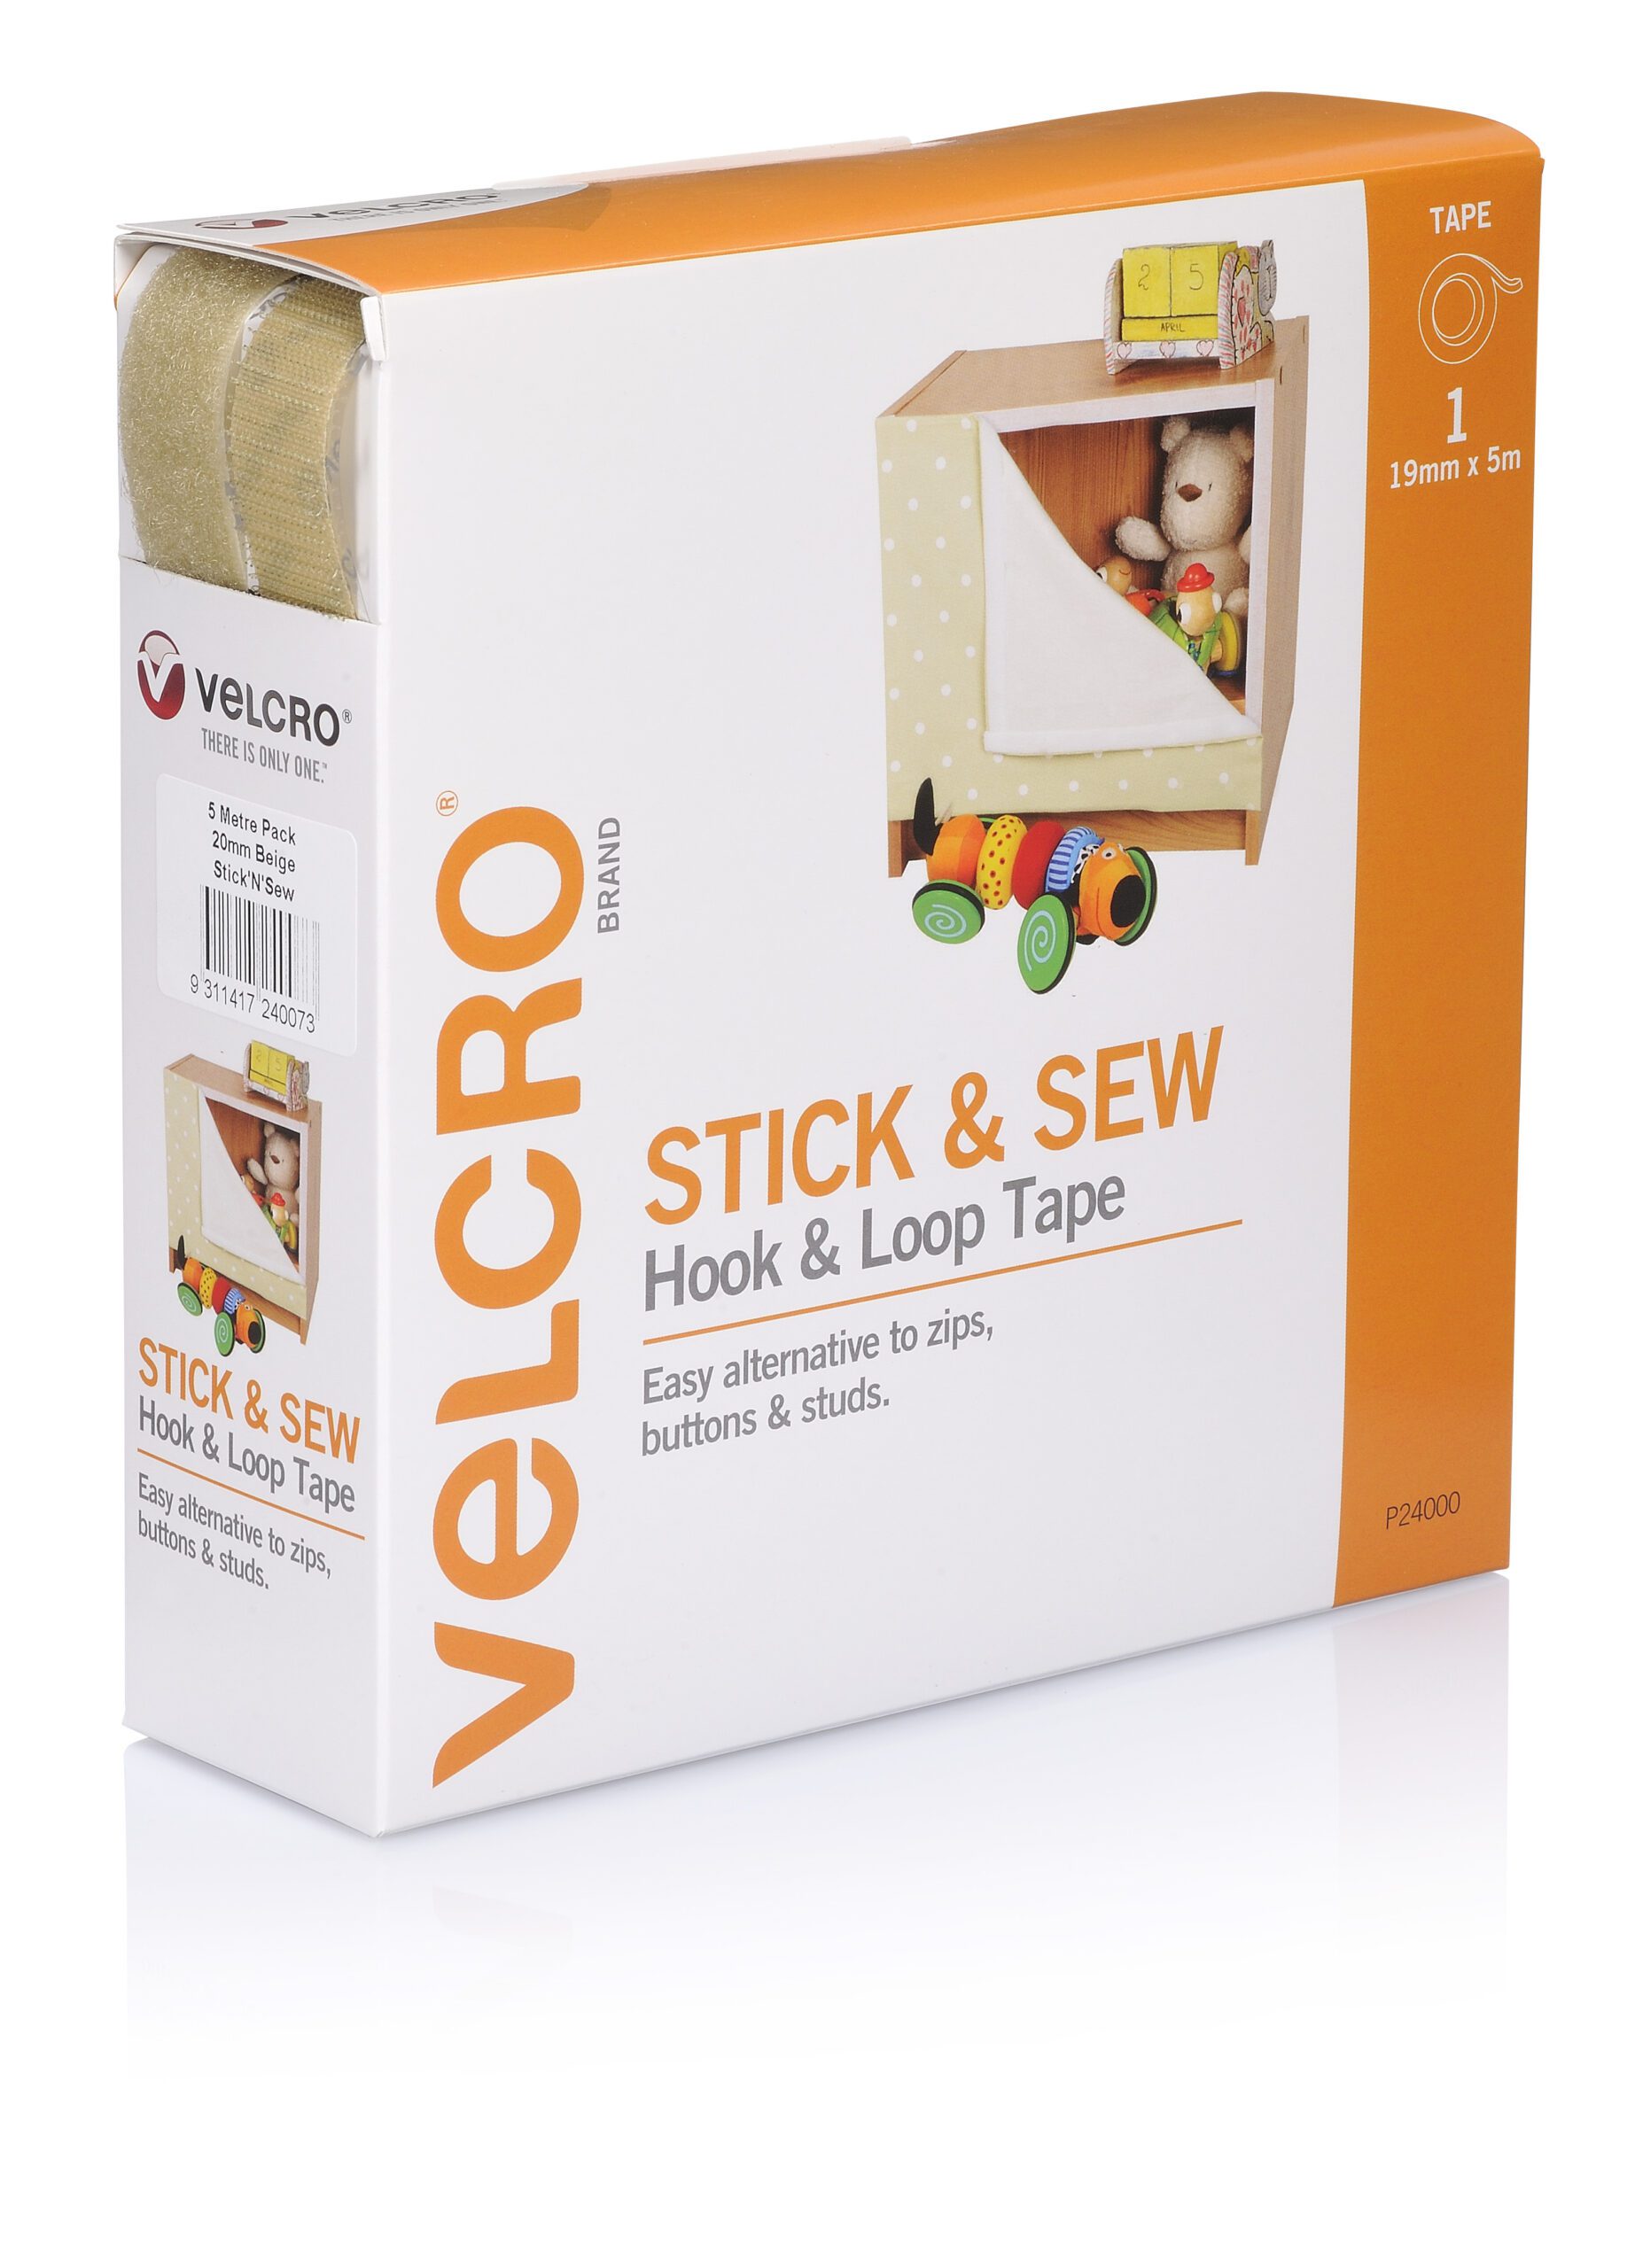 VELCRO® Brand 20mm Self Adhesive Hook and Loop Tape Sticky Back